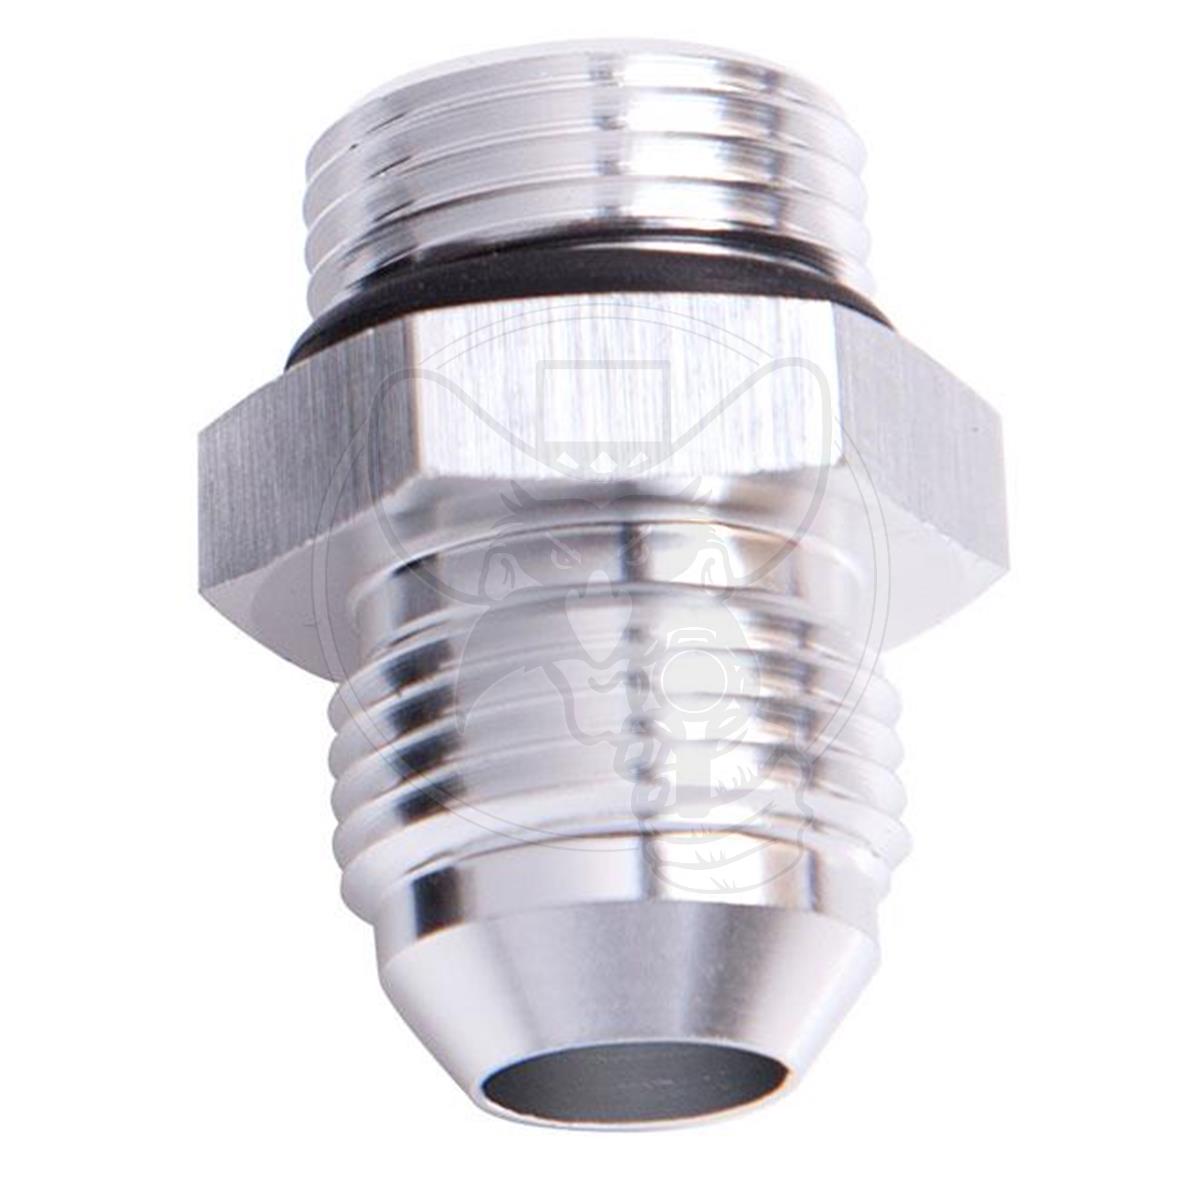 Aeroflow -10 ORB to -12AN Straight Male Flare Adapter - Silver